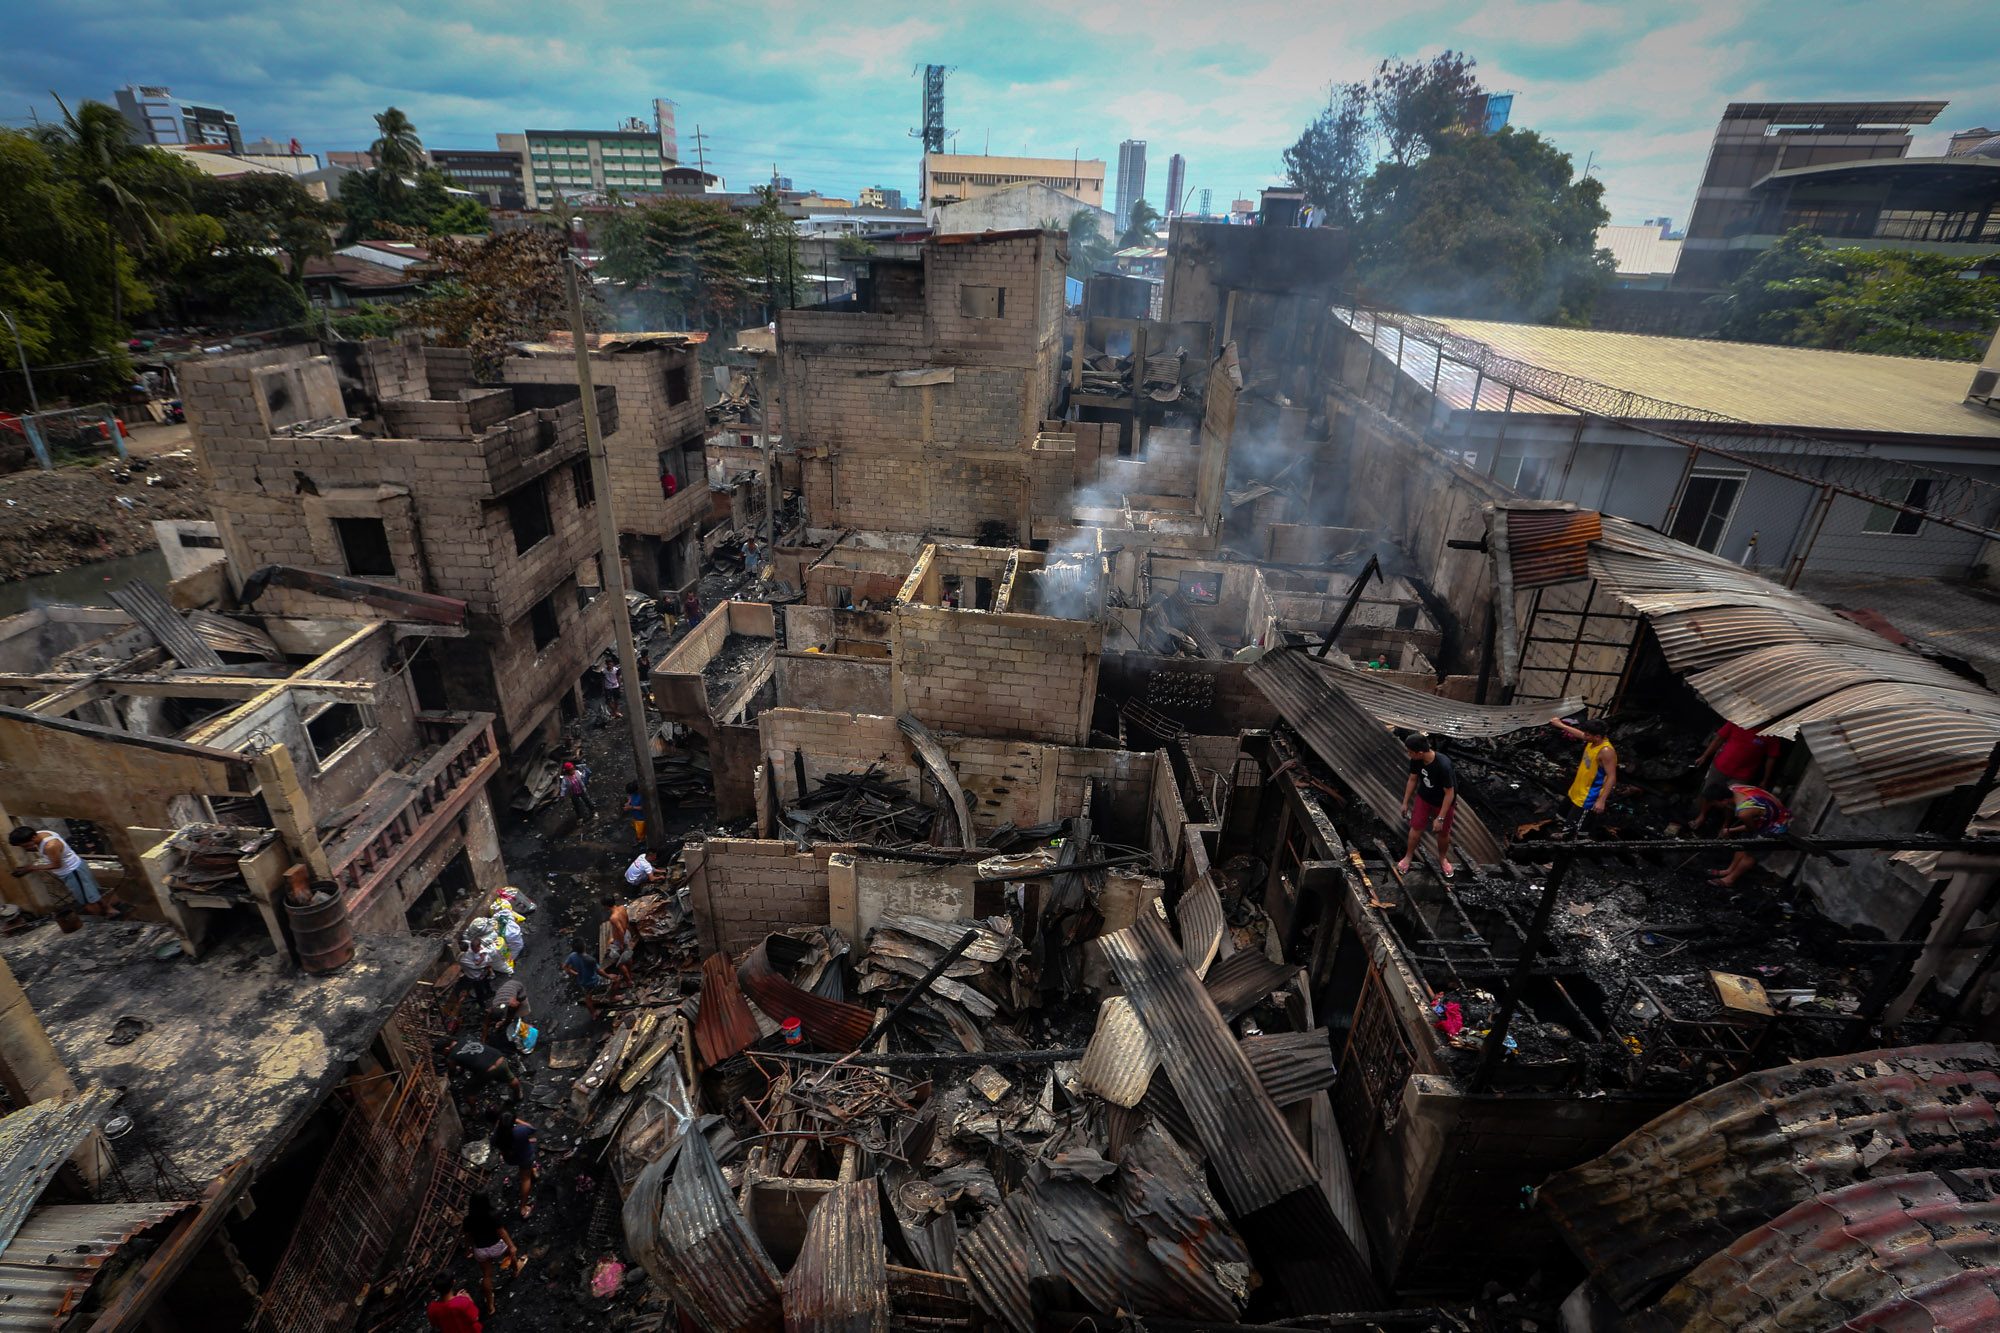 AFTERMATH. Residents of Talayan, Quezon City, on January 29, 2019, pick up the pieces and pore over what was left of their homes after a blaze razed their community on January 28, 2019. Photo by Jire Carreon/Rappler  